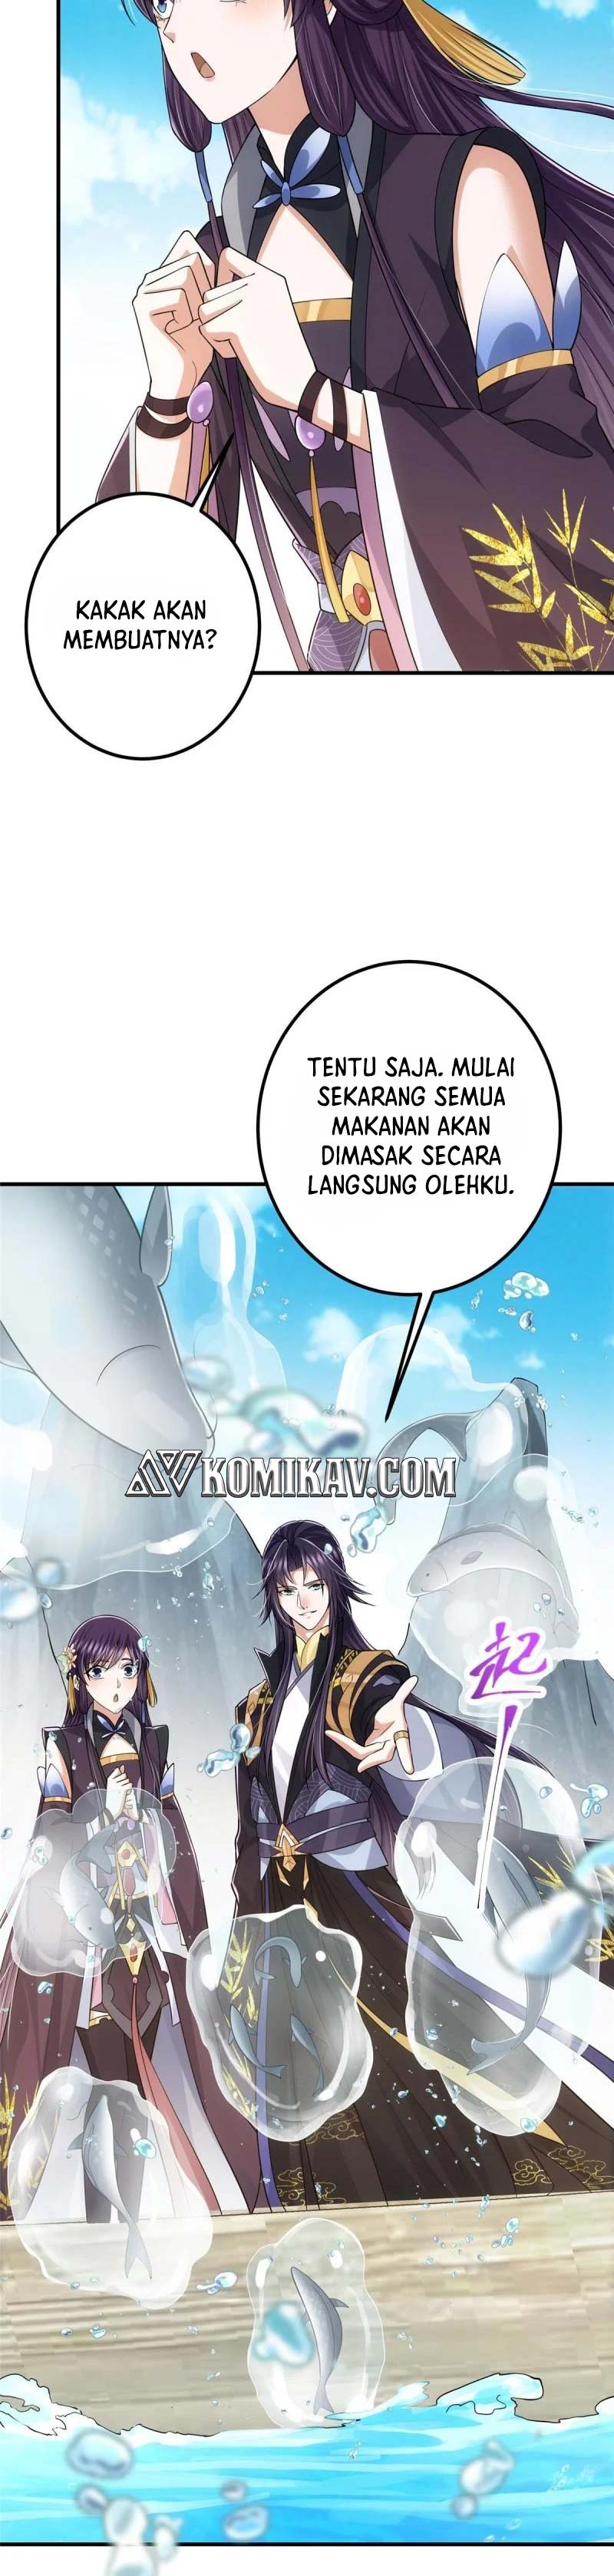 Keep A Low Profile, Sect Leader Chapter 86 Bahasa Indonesia